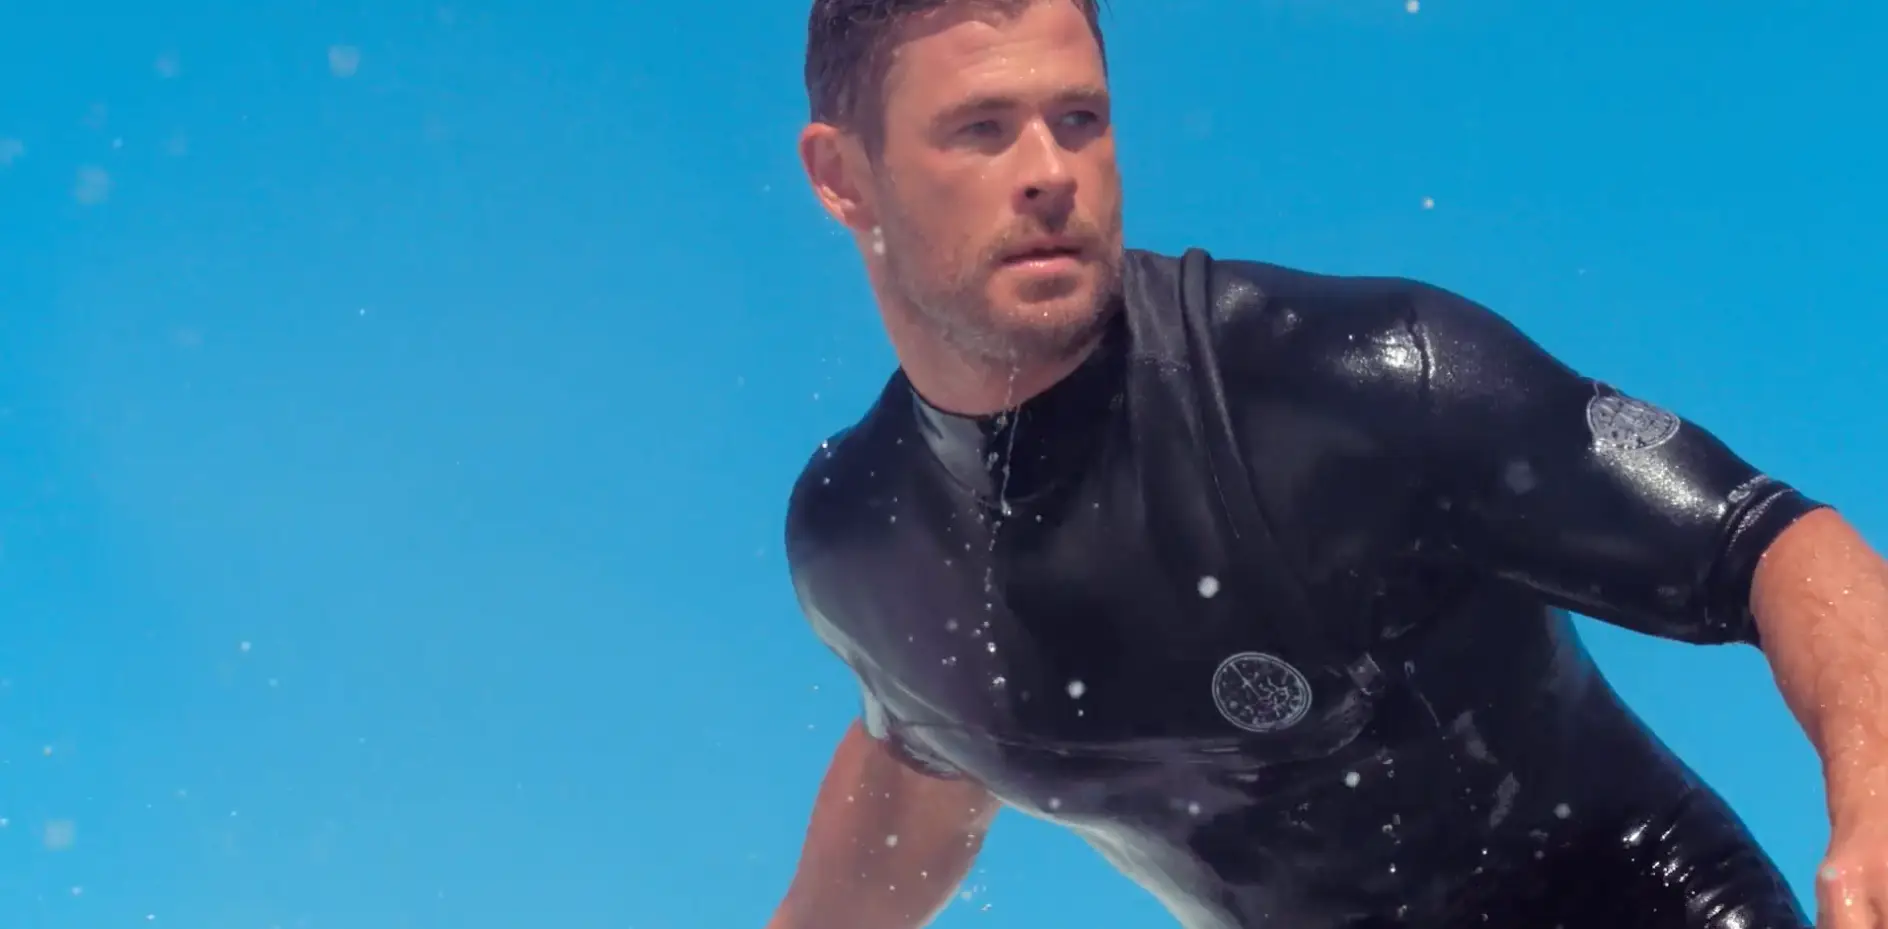 A man in a wetsuit riding a surfboard, providing entertainment.